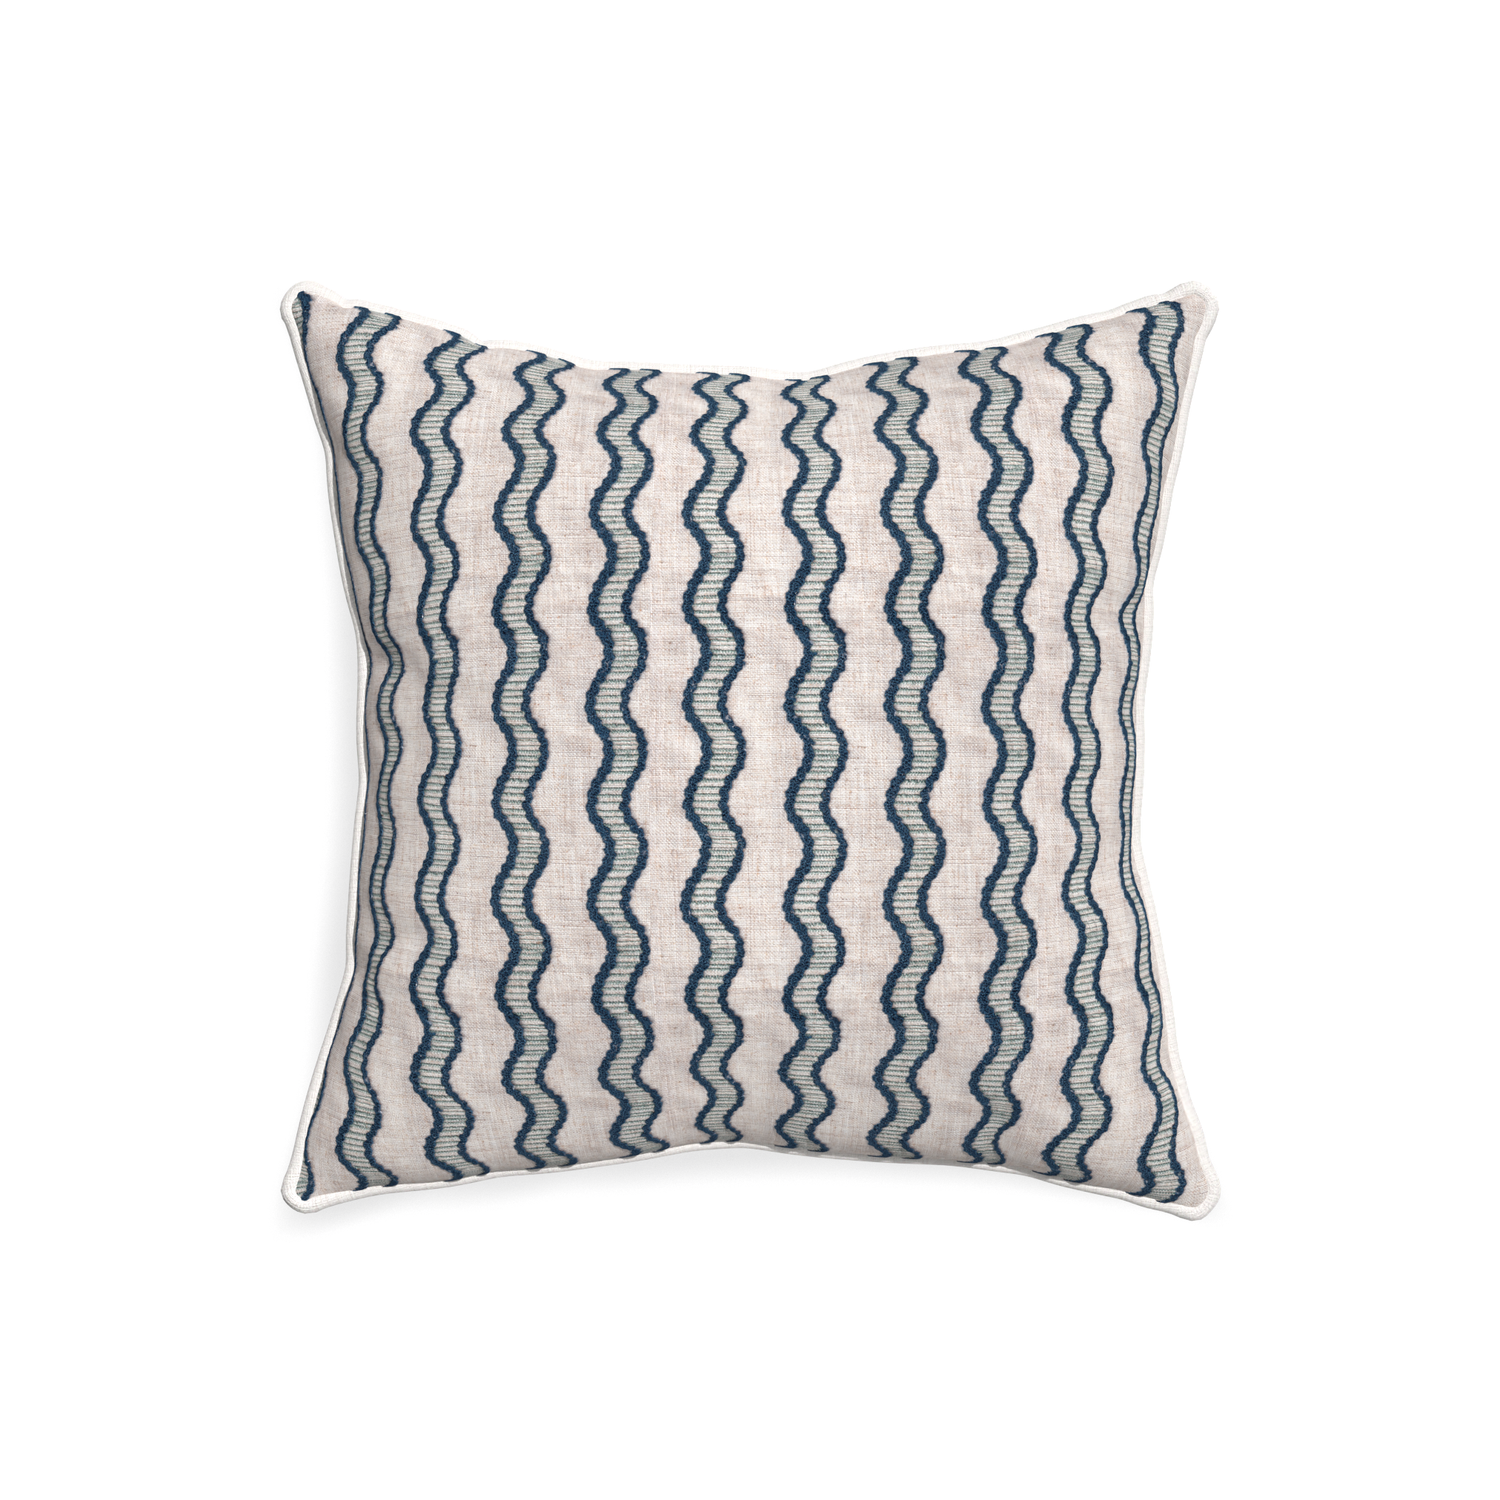 20-square beatrice custom embroidered wavepillow with snow piping on white background